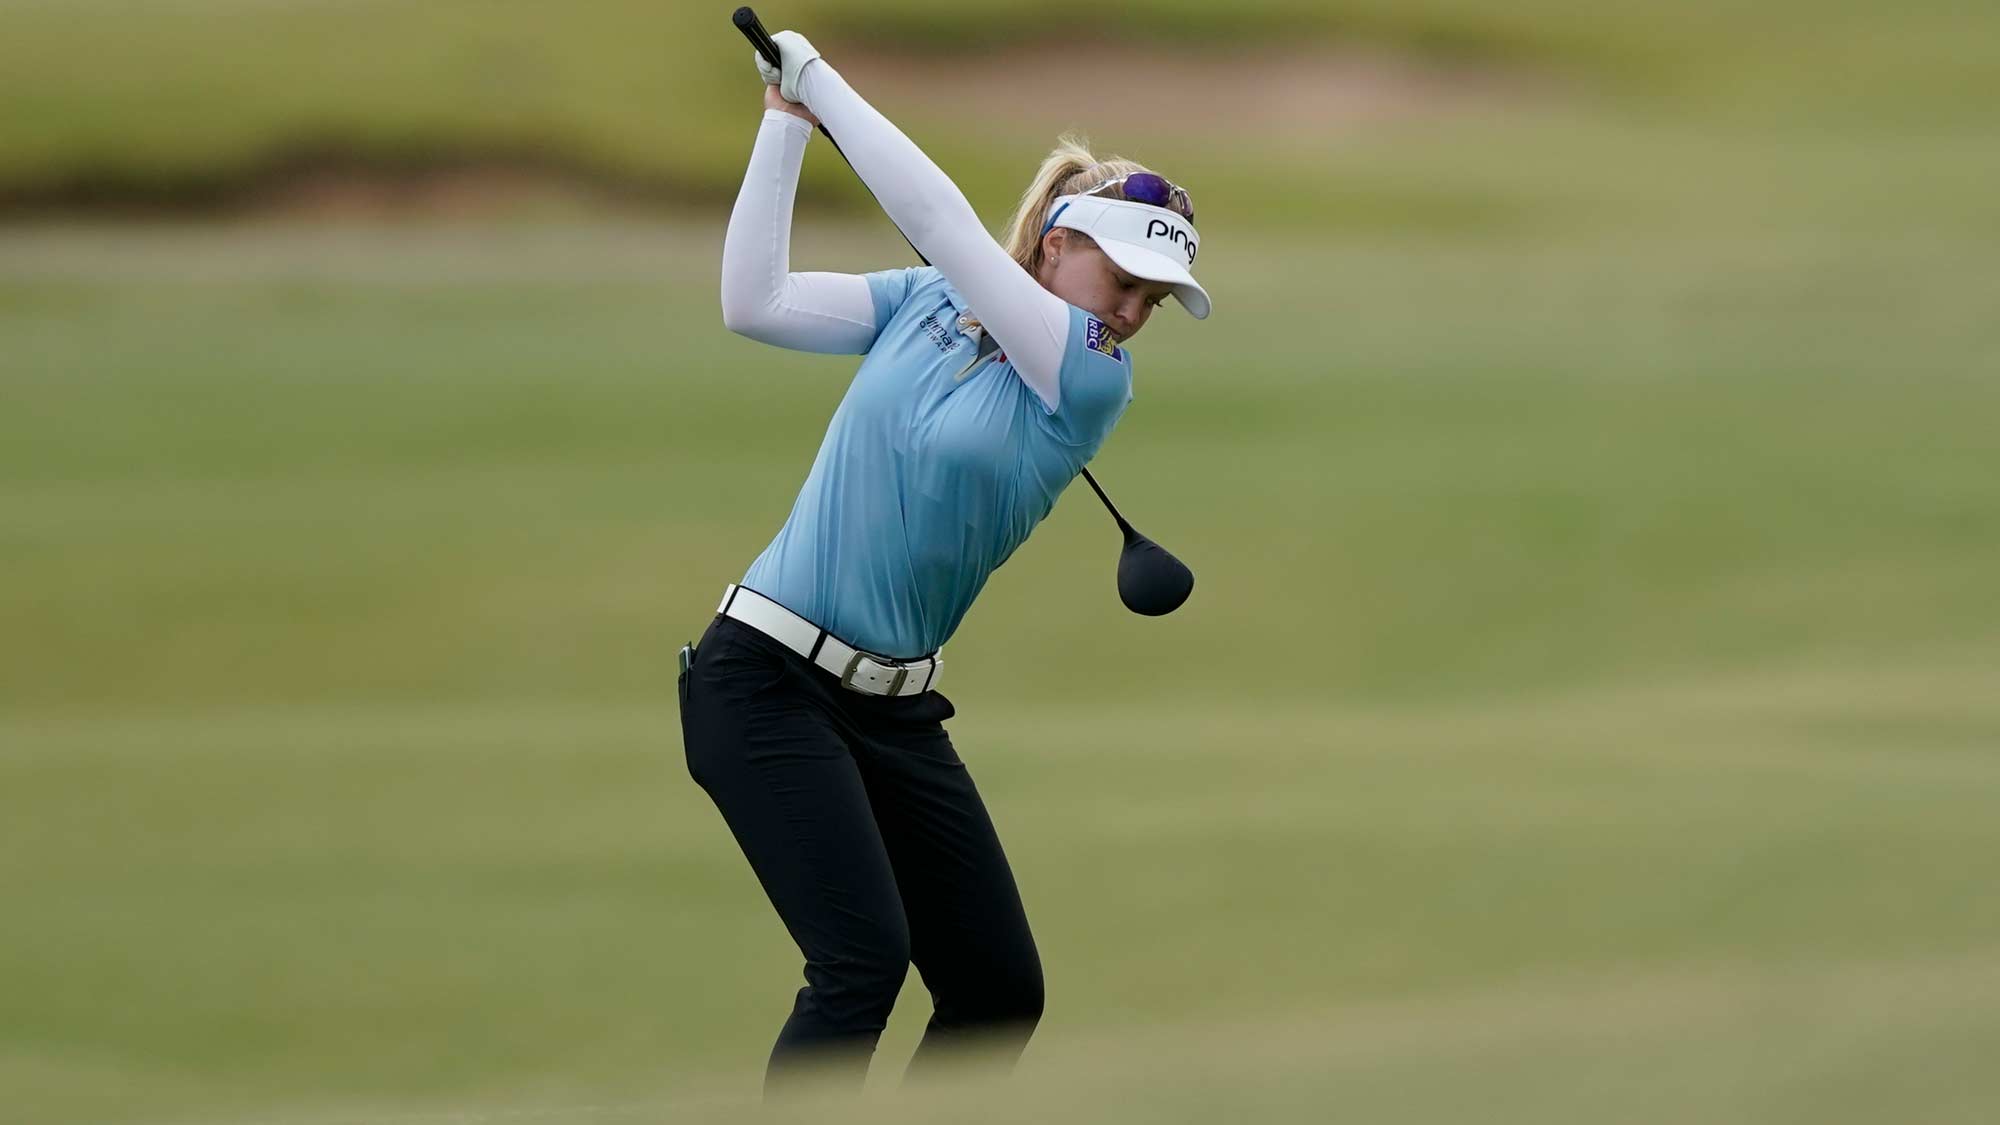 Brooke Henderson in the second round VOA Classic